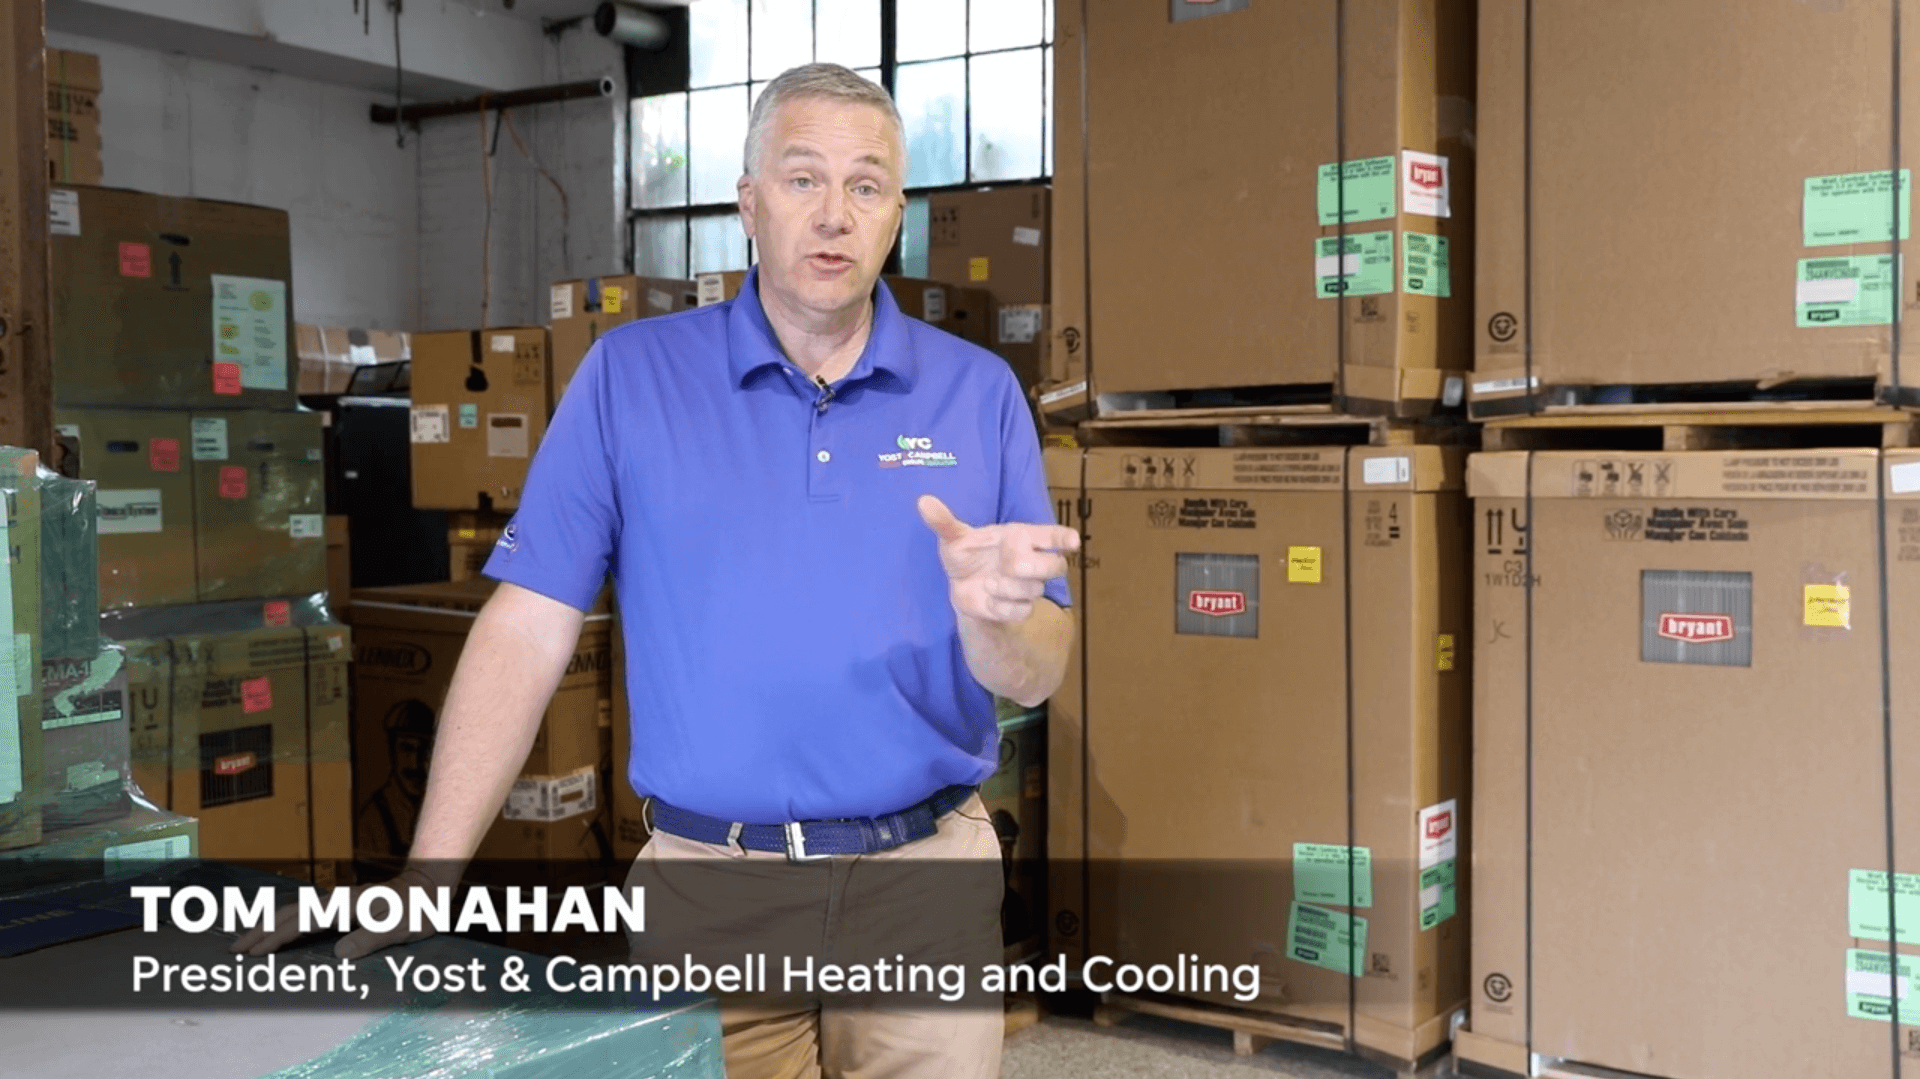 Watch Tom Monahan talk about air source heat pumps and converting your home